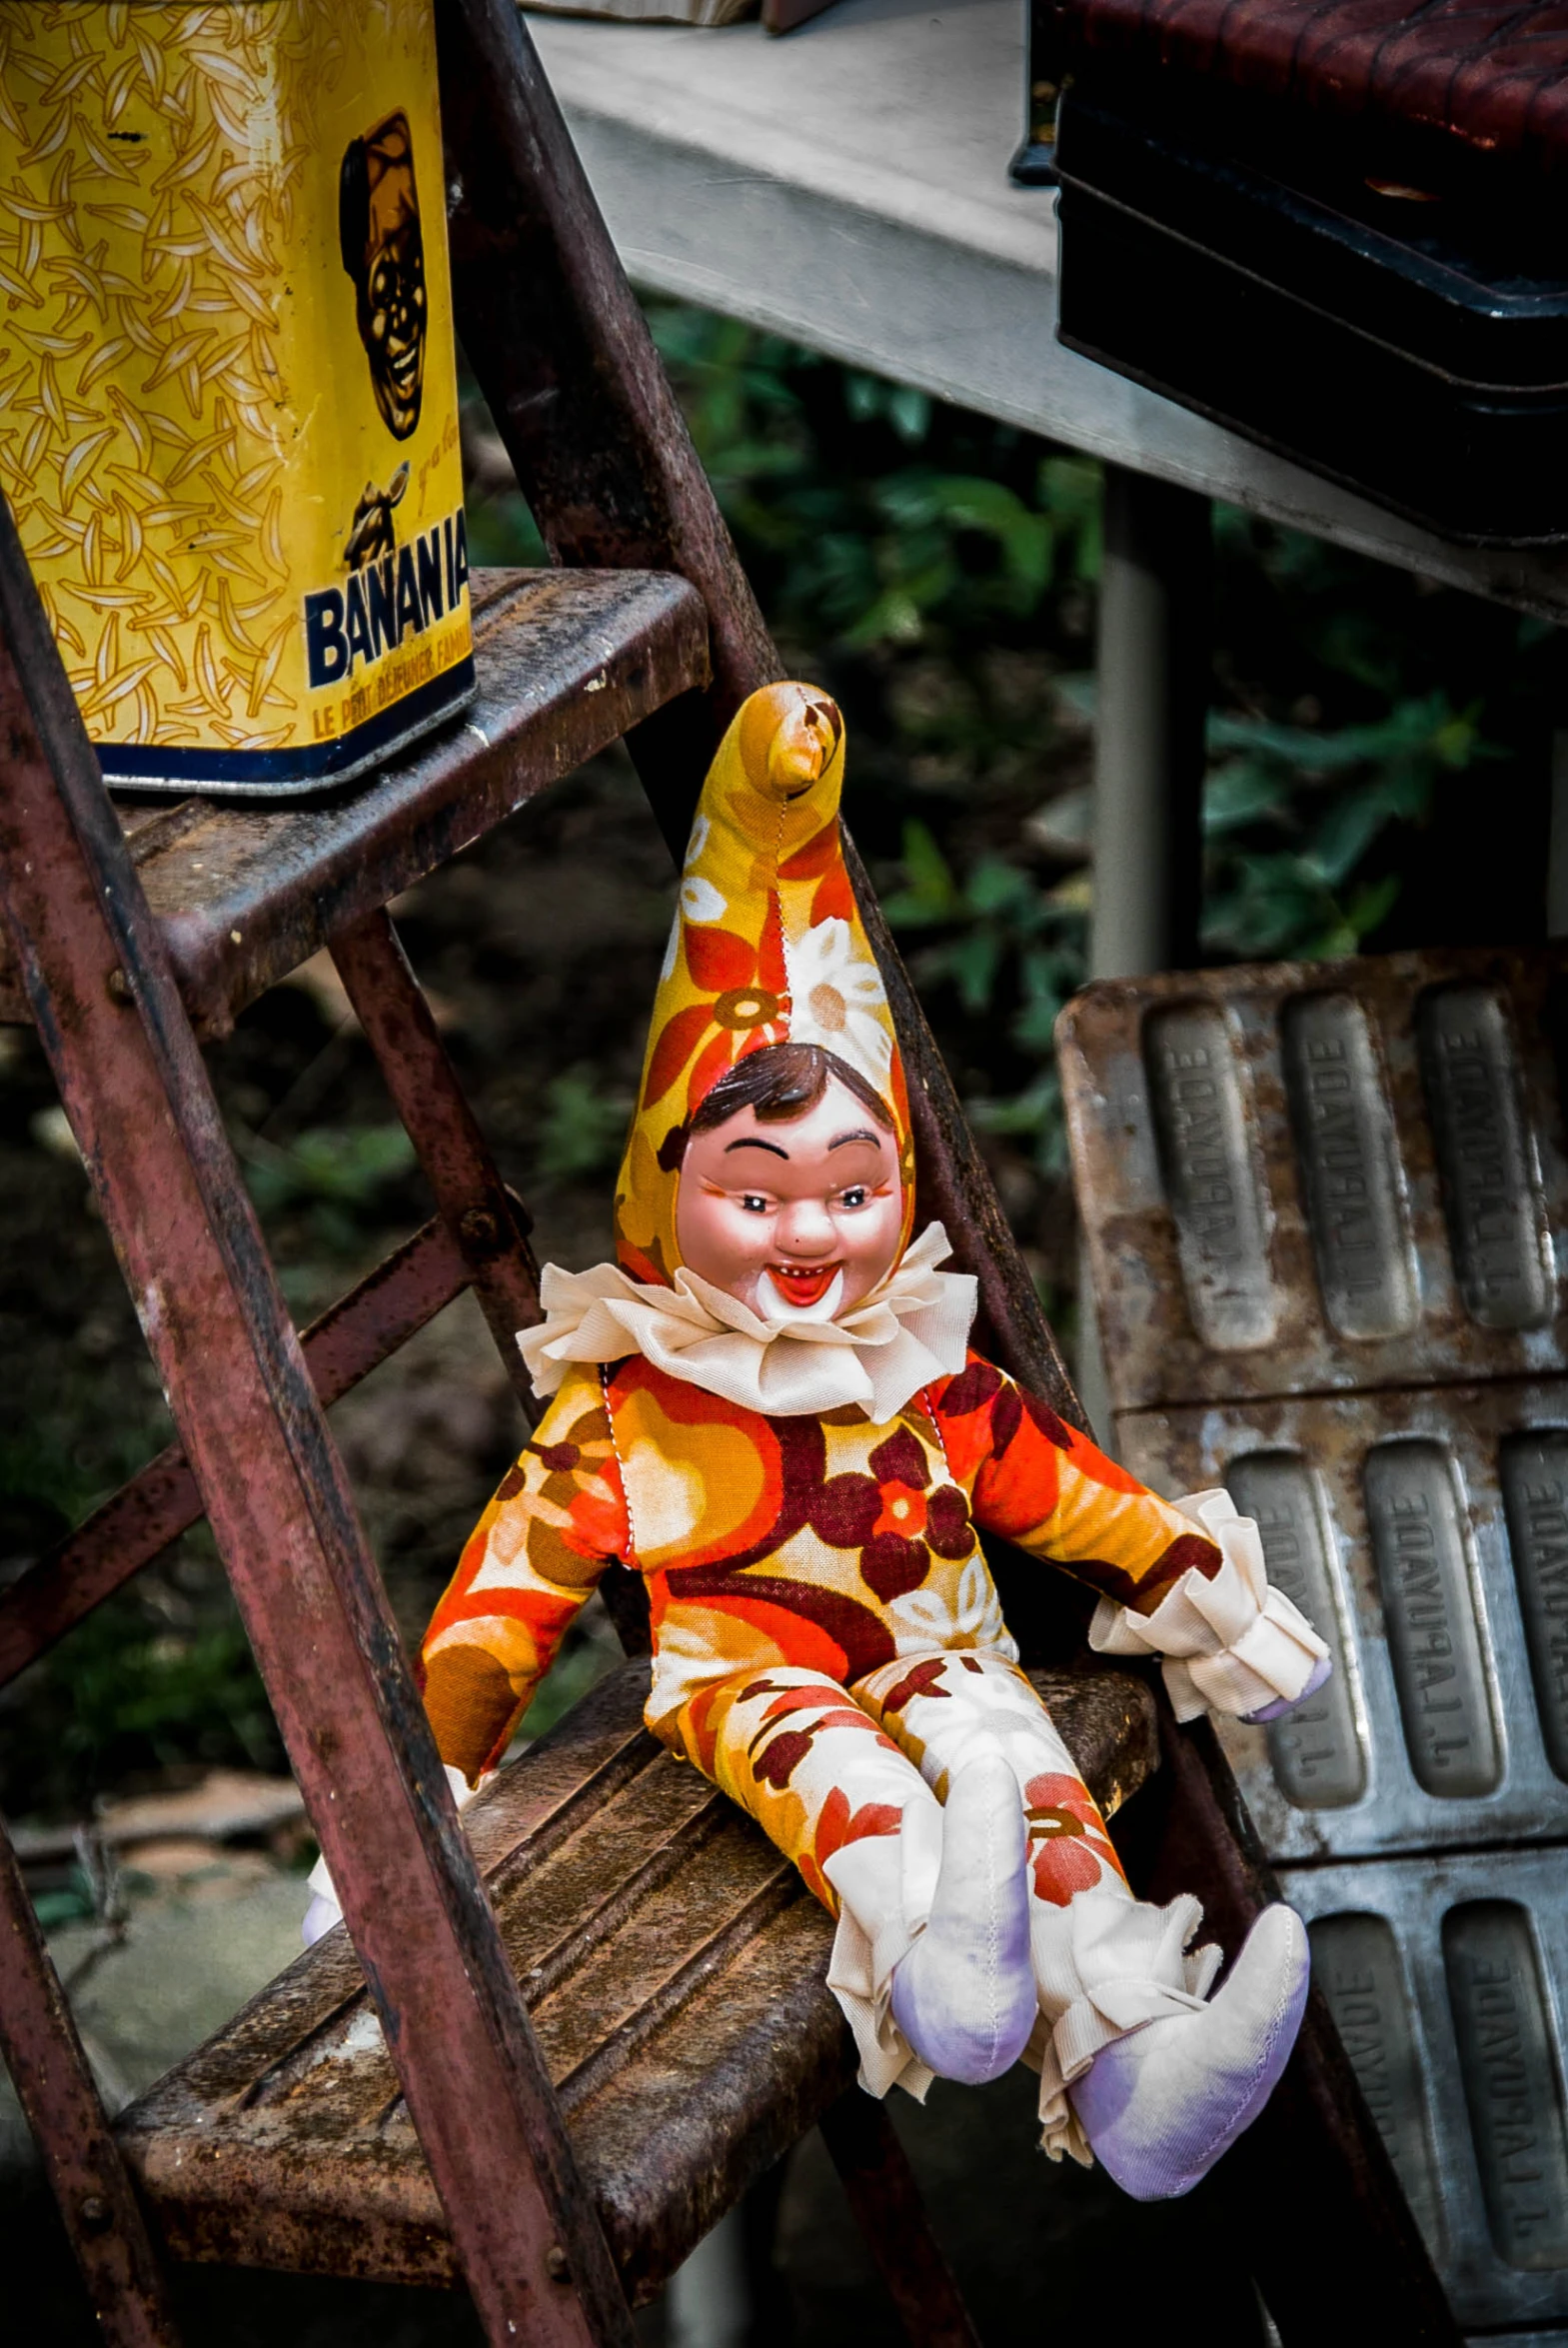 the clown is sitting on a wooden step